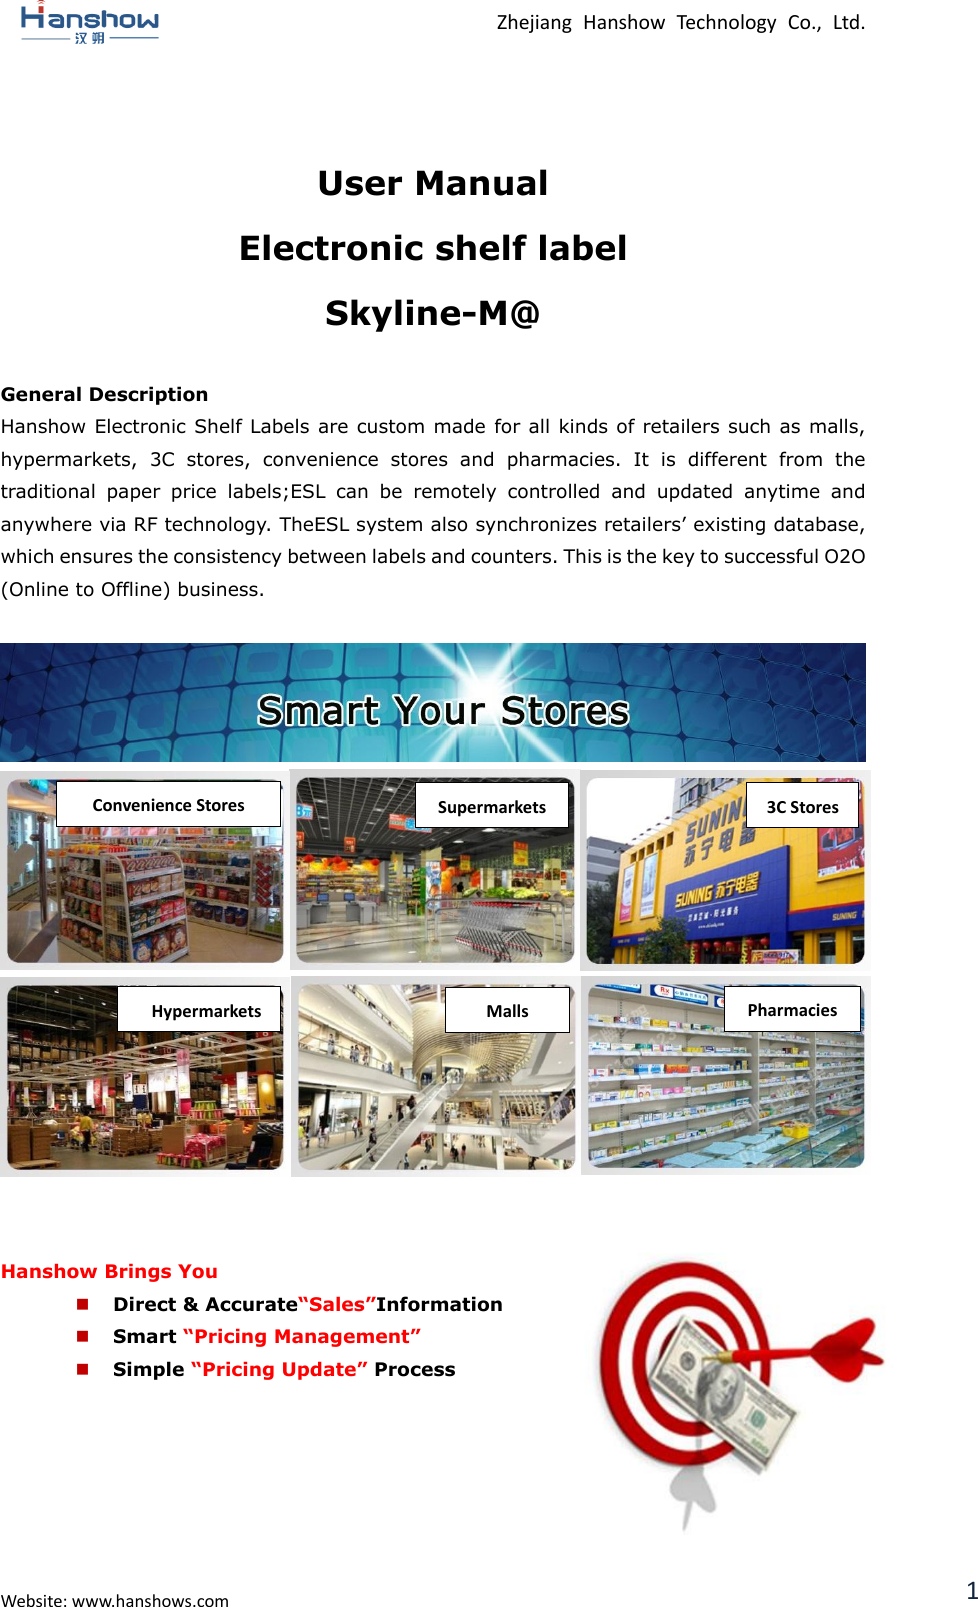  Zhejiang  Hanshow  Technology  Co.,  Ltd.   Website: www.hanshows.com 1  User Manual Electronic shelf label Skyline-M@  General Description Hanshow Electronic Shelf Labels are custom made for all kinds of retailers such as malls, hypermarkets,  3C  stores,  convenience  stores  and  pharmacies.  It  is  different  from  the traditional  paper  price  labels;ESL  can  be  remotely  controlled  and  updated  anytime  and anywhere via RF technology. TheESL system also synchronizes retailers’ existing database, which ensures the consistency between labels and counters. This is the key to successful O2O (Online to Offline) business.                    Hanshow Brings You  Direct &amp; Accurate“Sales”Information  Smart “Pricing Management”  Simple “Pricing Update” Process      Convenience Stores Supermarkets 3C Stores Pharmacies Malls Hypermarkets G-MALL 